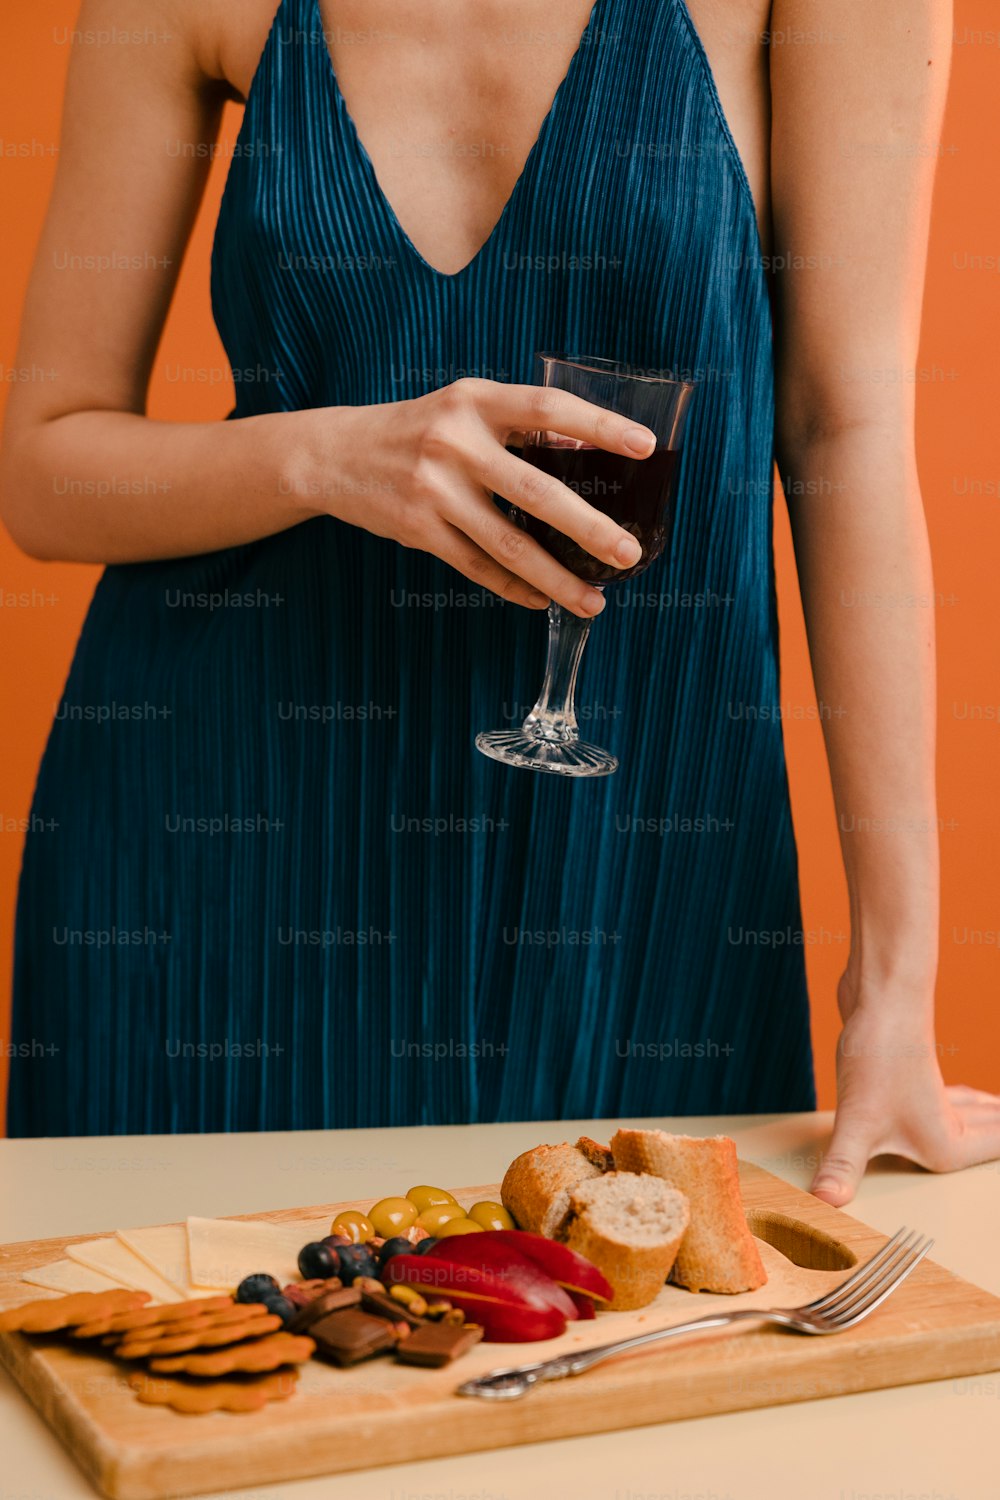 a woman in a blue dress holding a glass of wine